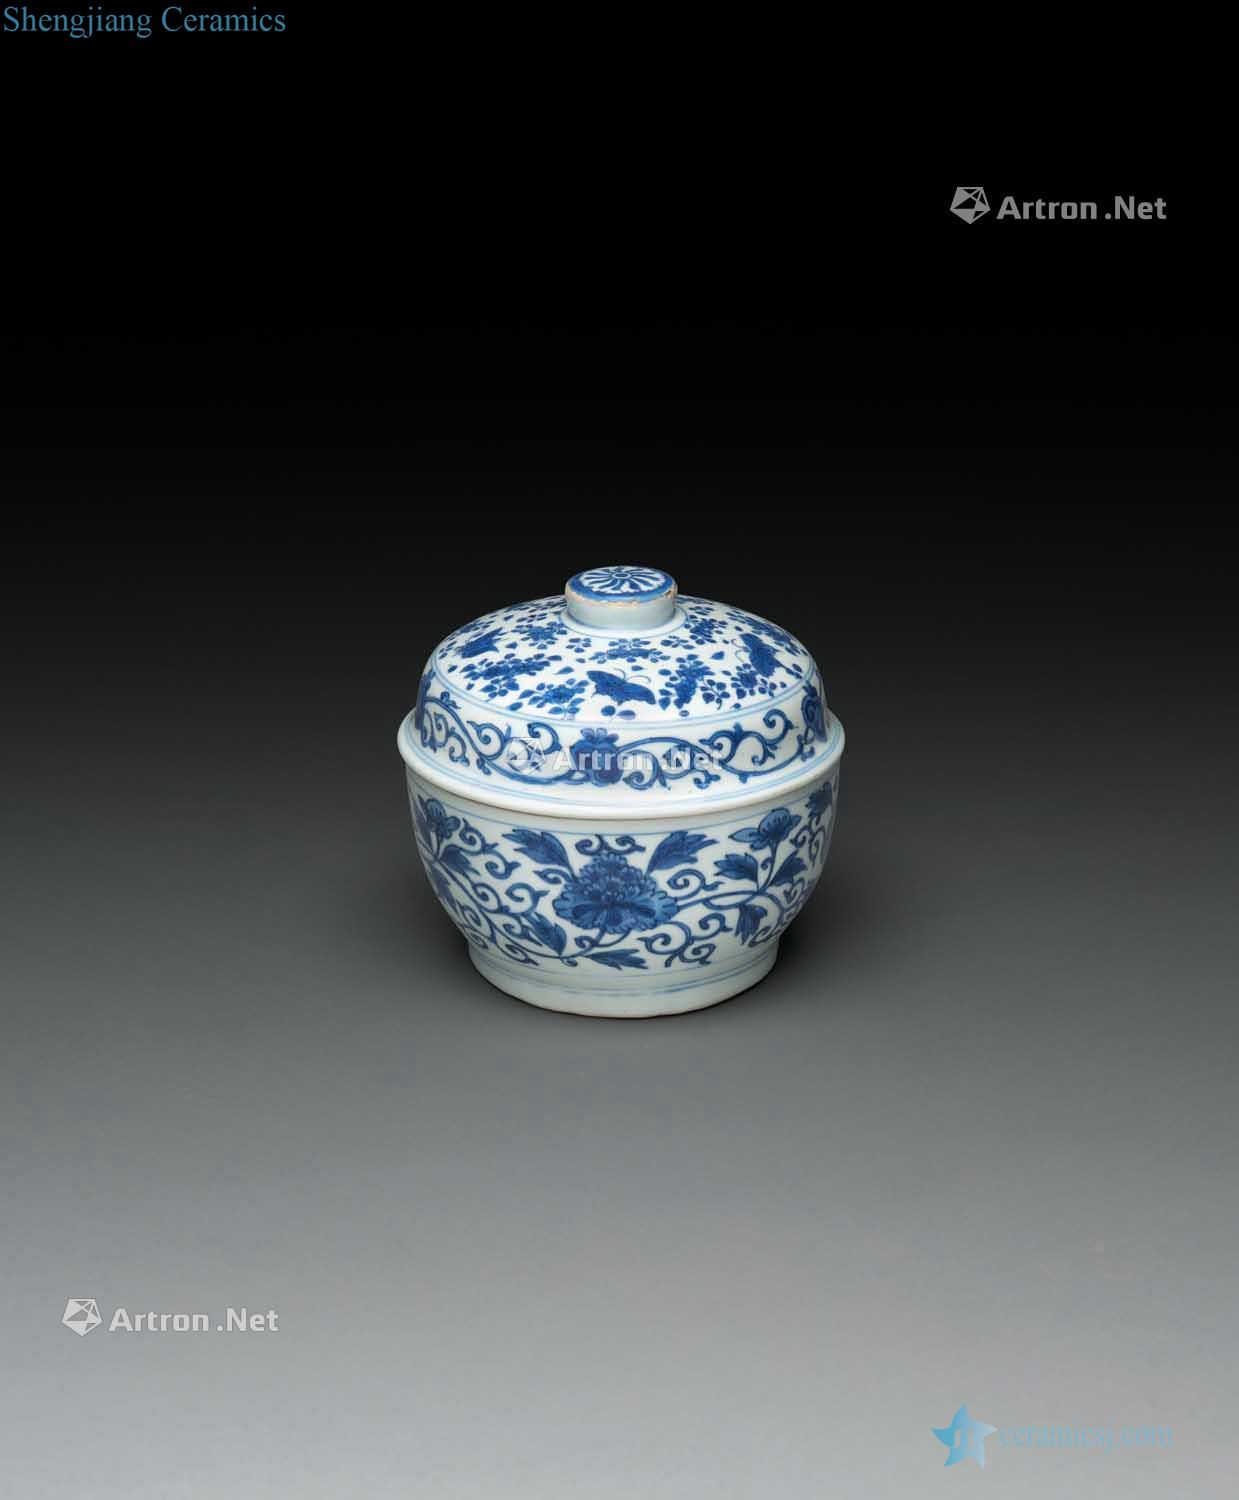 The Ming and qing dynasties transition In the 17th century mid - Blue and white dome box